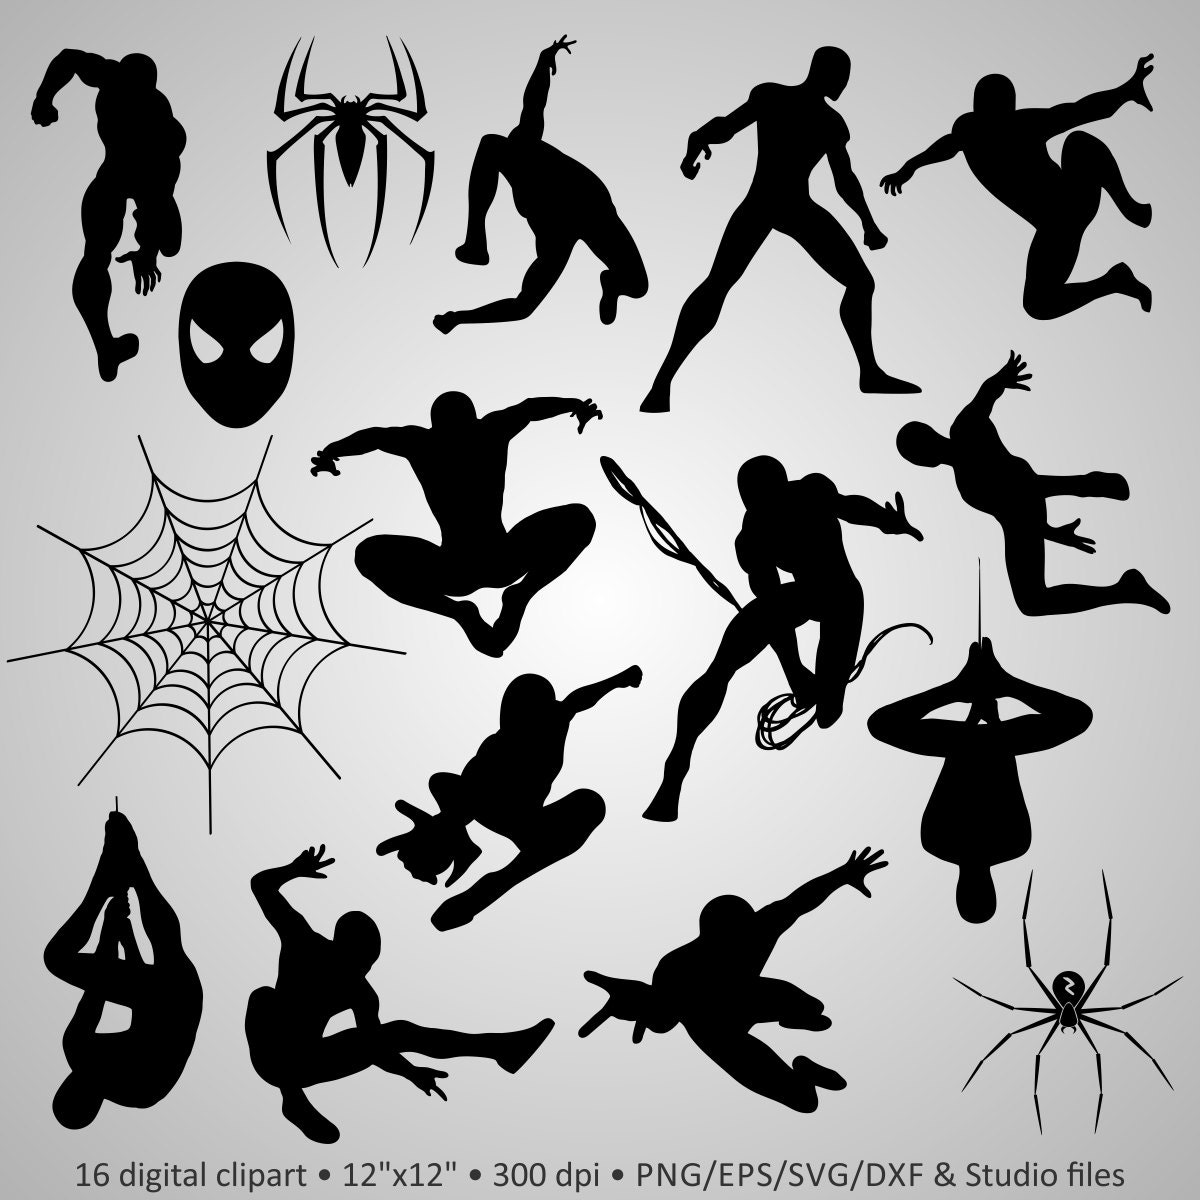 Download Buy 2 Get 1 Free! Digital Clipart Silhouettes Spiderman ...